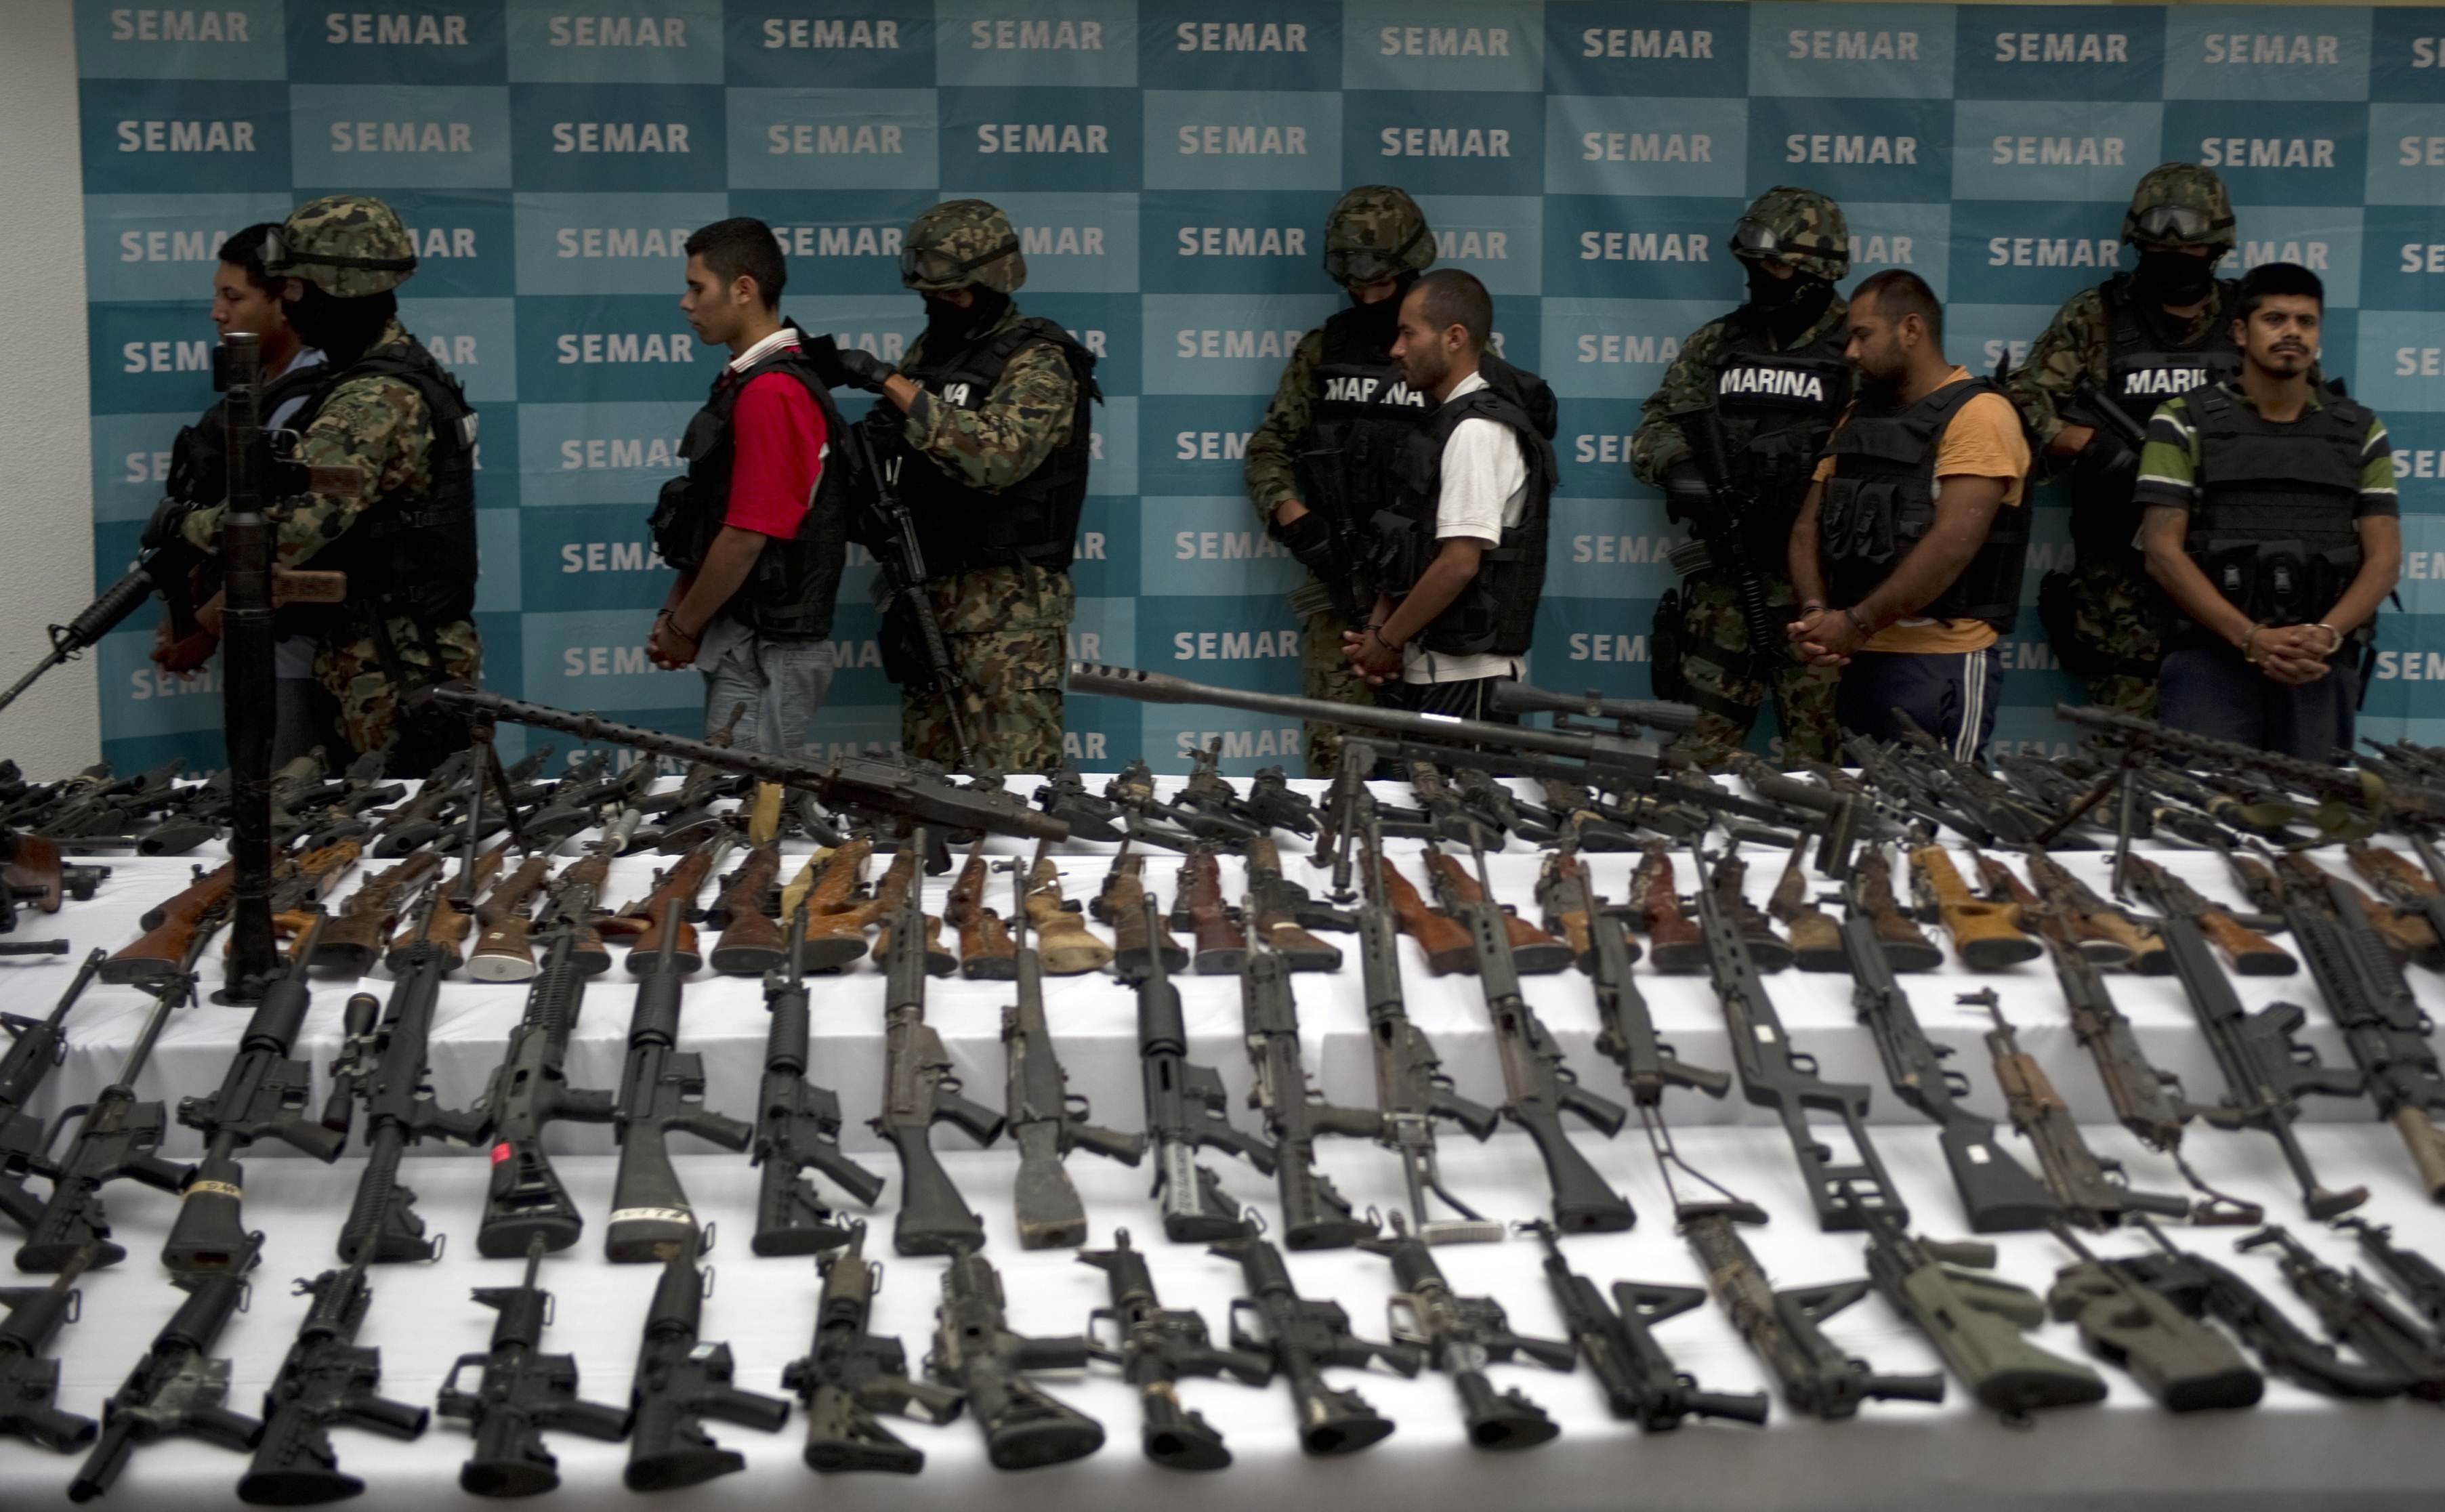 On June 9, 2011, Mexican marines escorted five alleged drug traffickers in the Zeta drug cartel in front of grenades, firearms, cocaine, and military uniforms confiscated in Mexico City.  (YuriCortez / AFP / Getty Images)